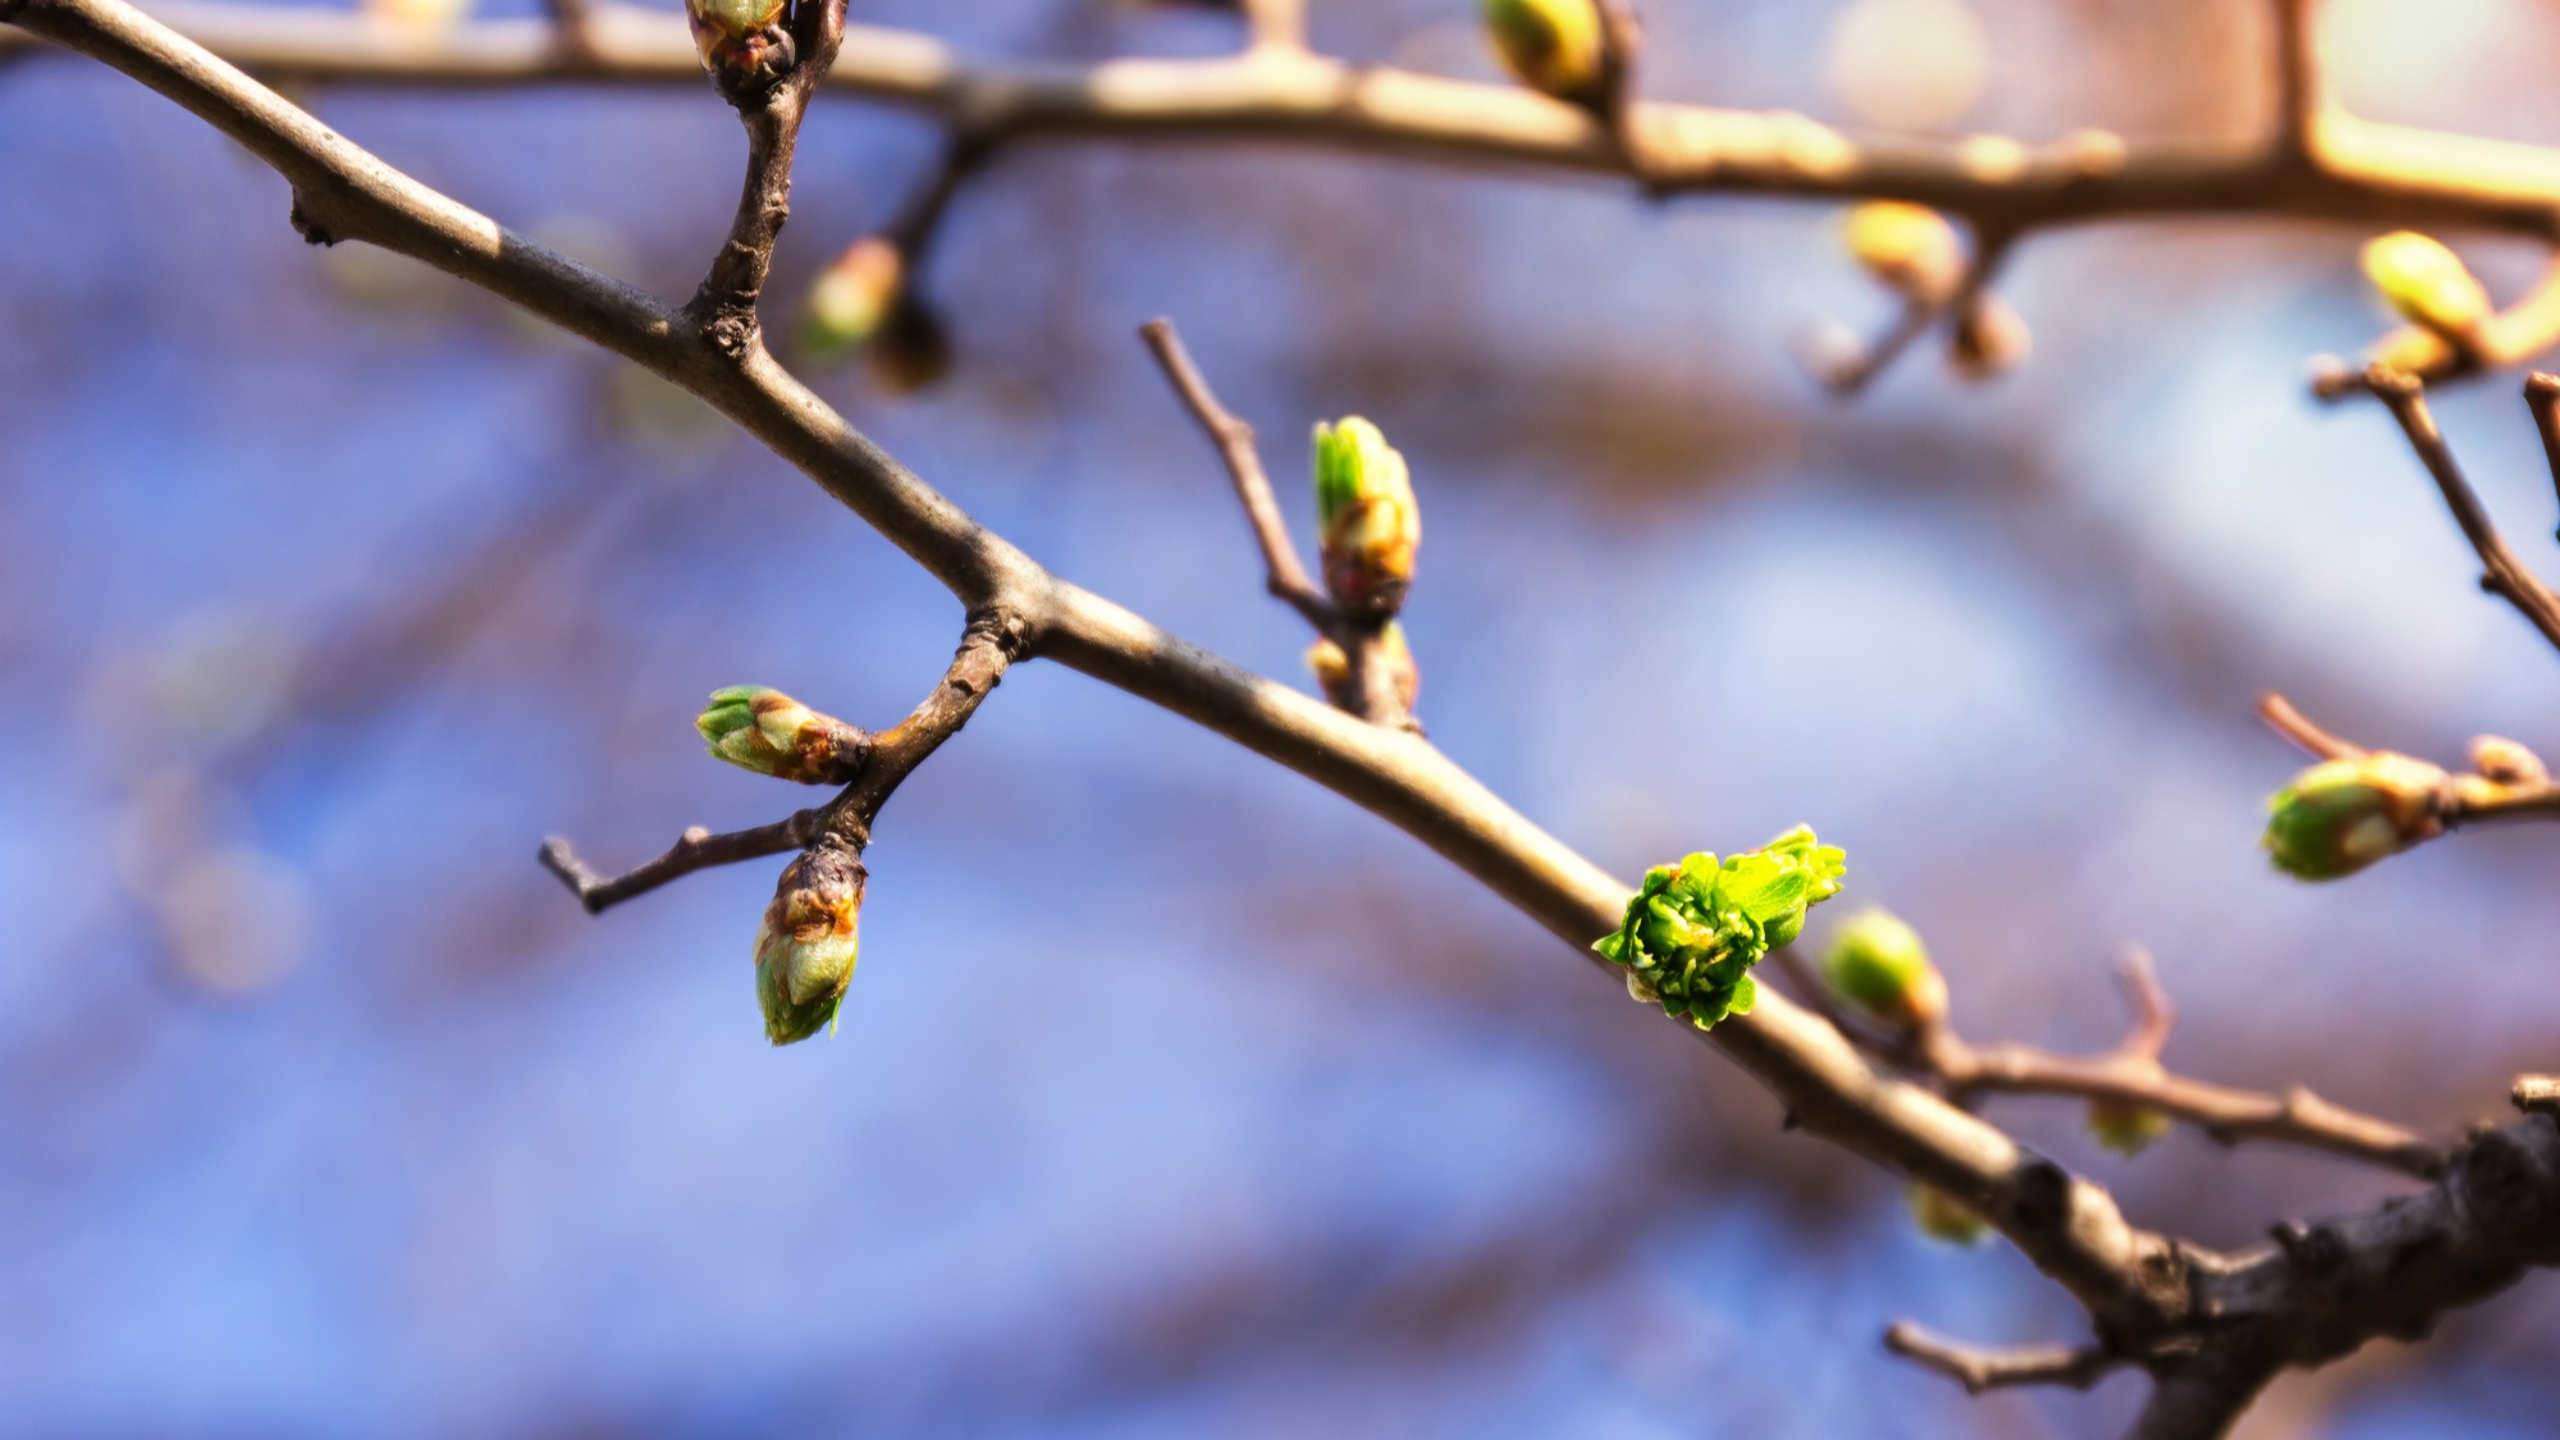 Warmth has everything to do with when trees start budding and leaves begin opening.